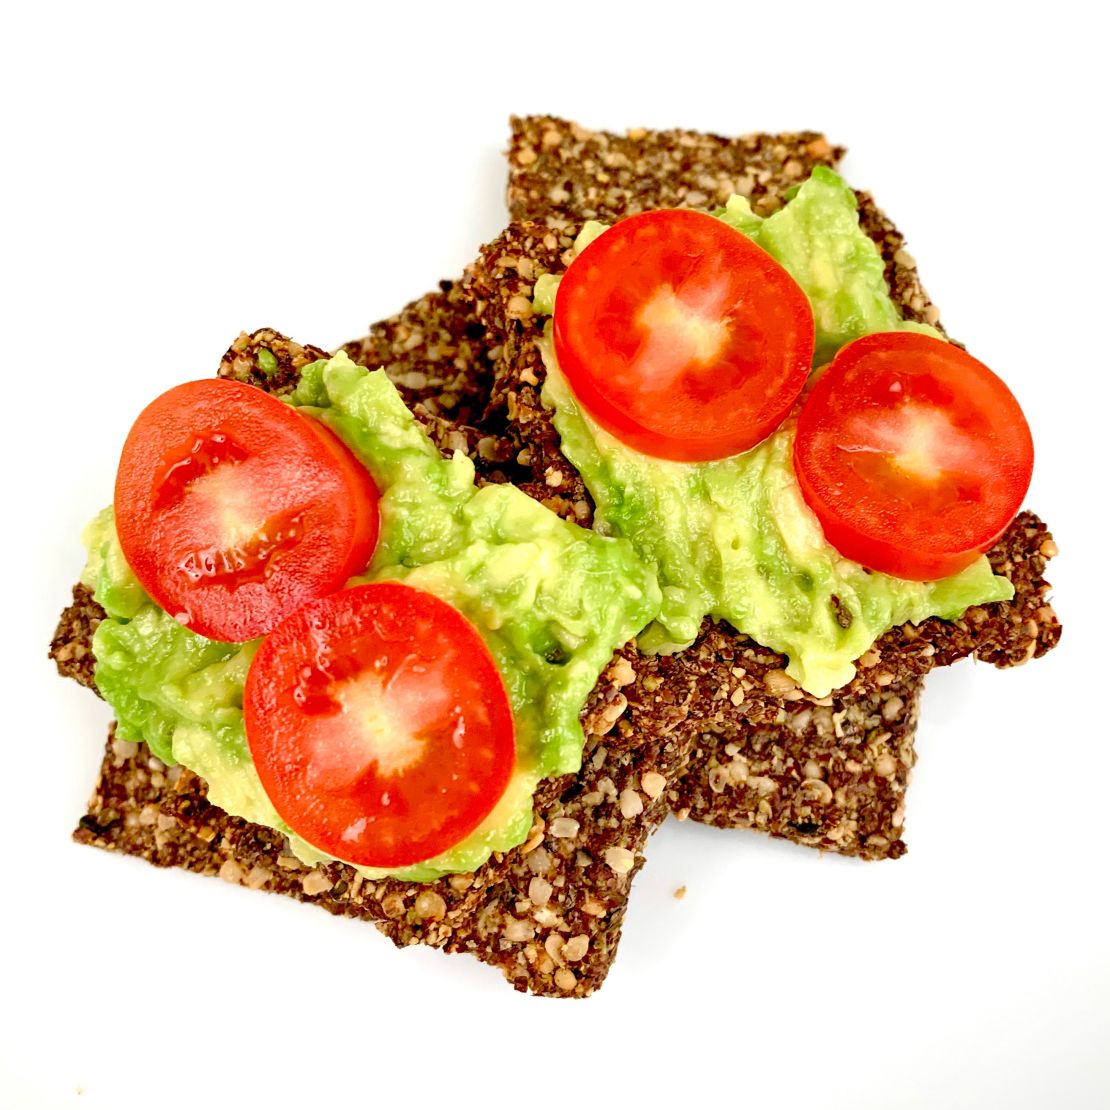 Lisa Drayer's omega-3 crackers are a healthy choice. 